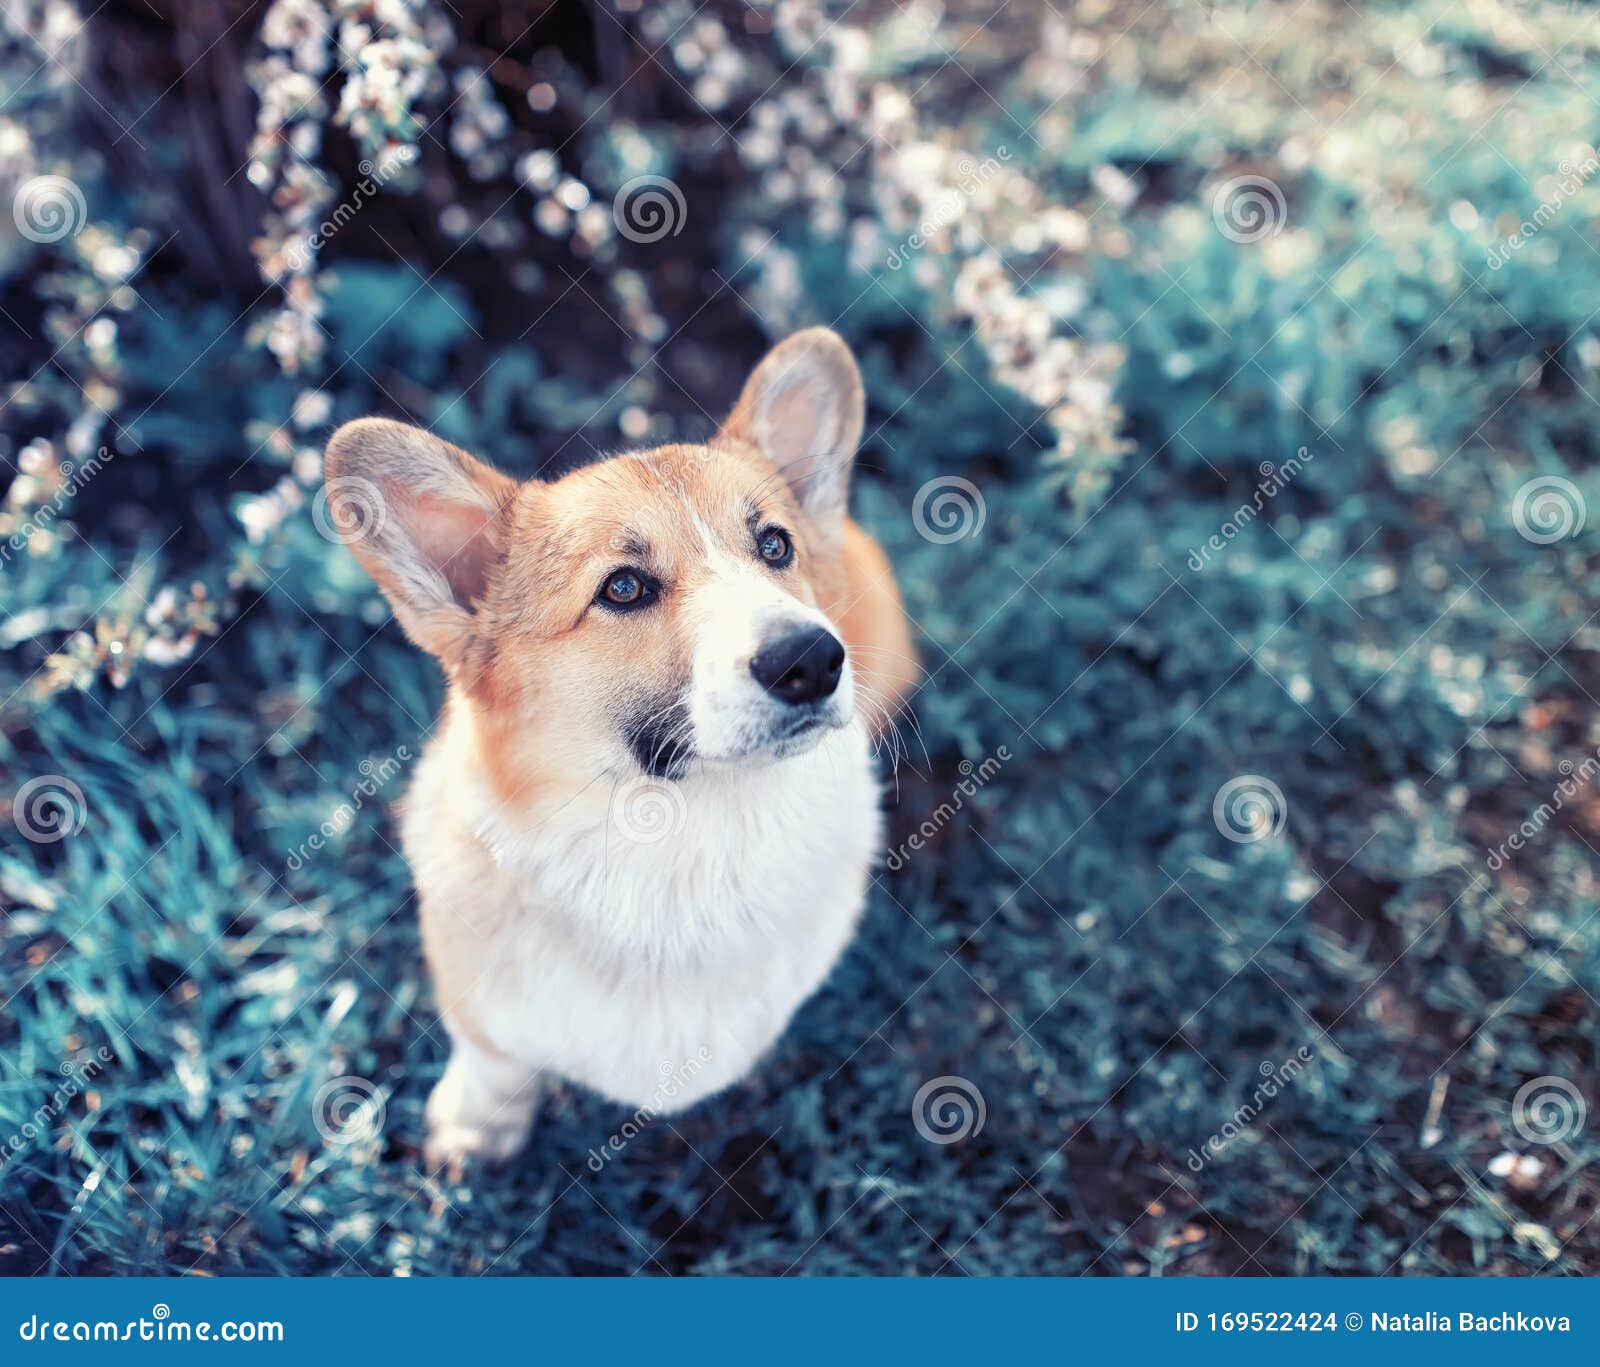 Portrait of a cute red dog puppy Corgi looks out from behind the branches of white cherry blossoms in the may garden